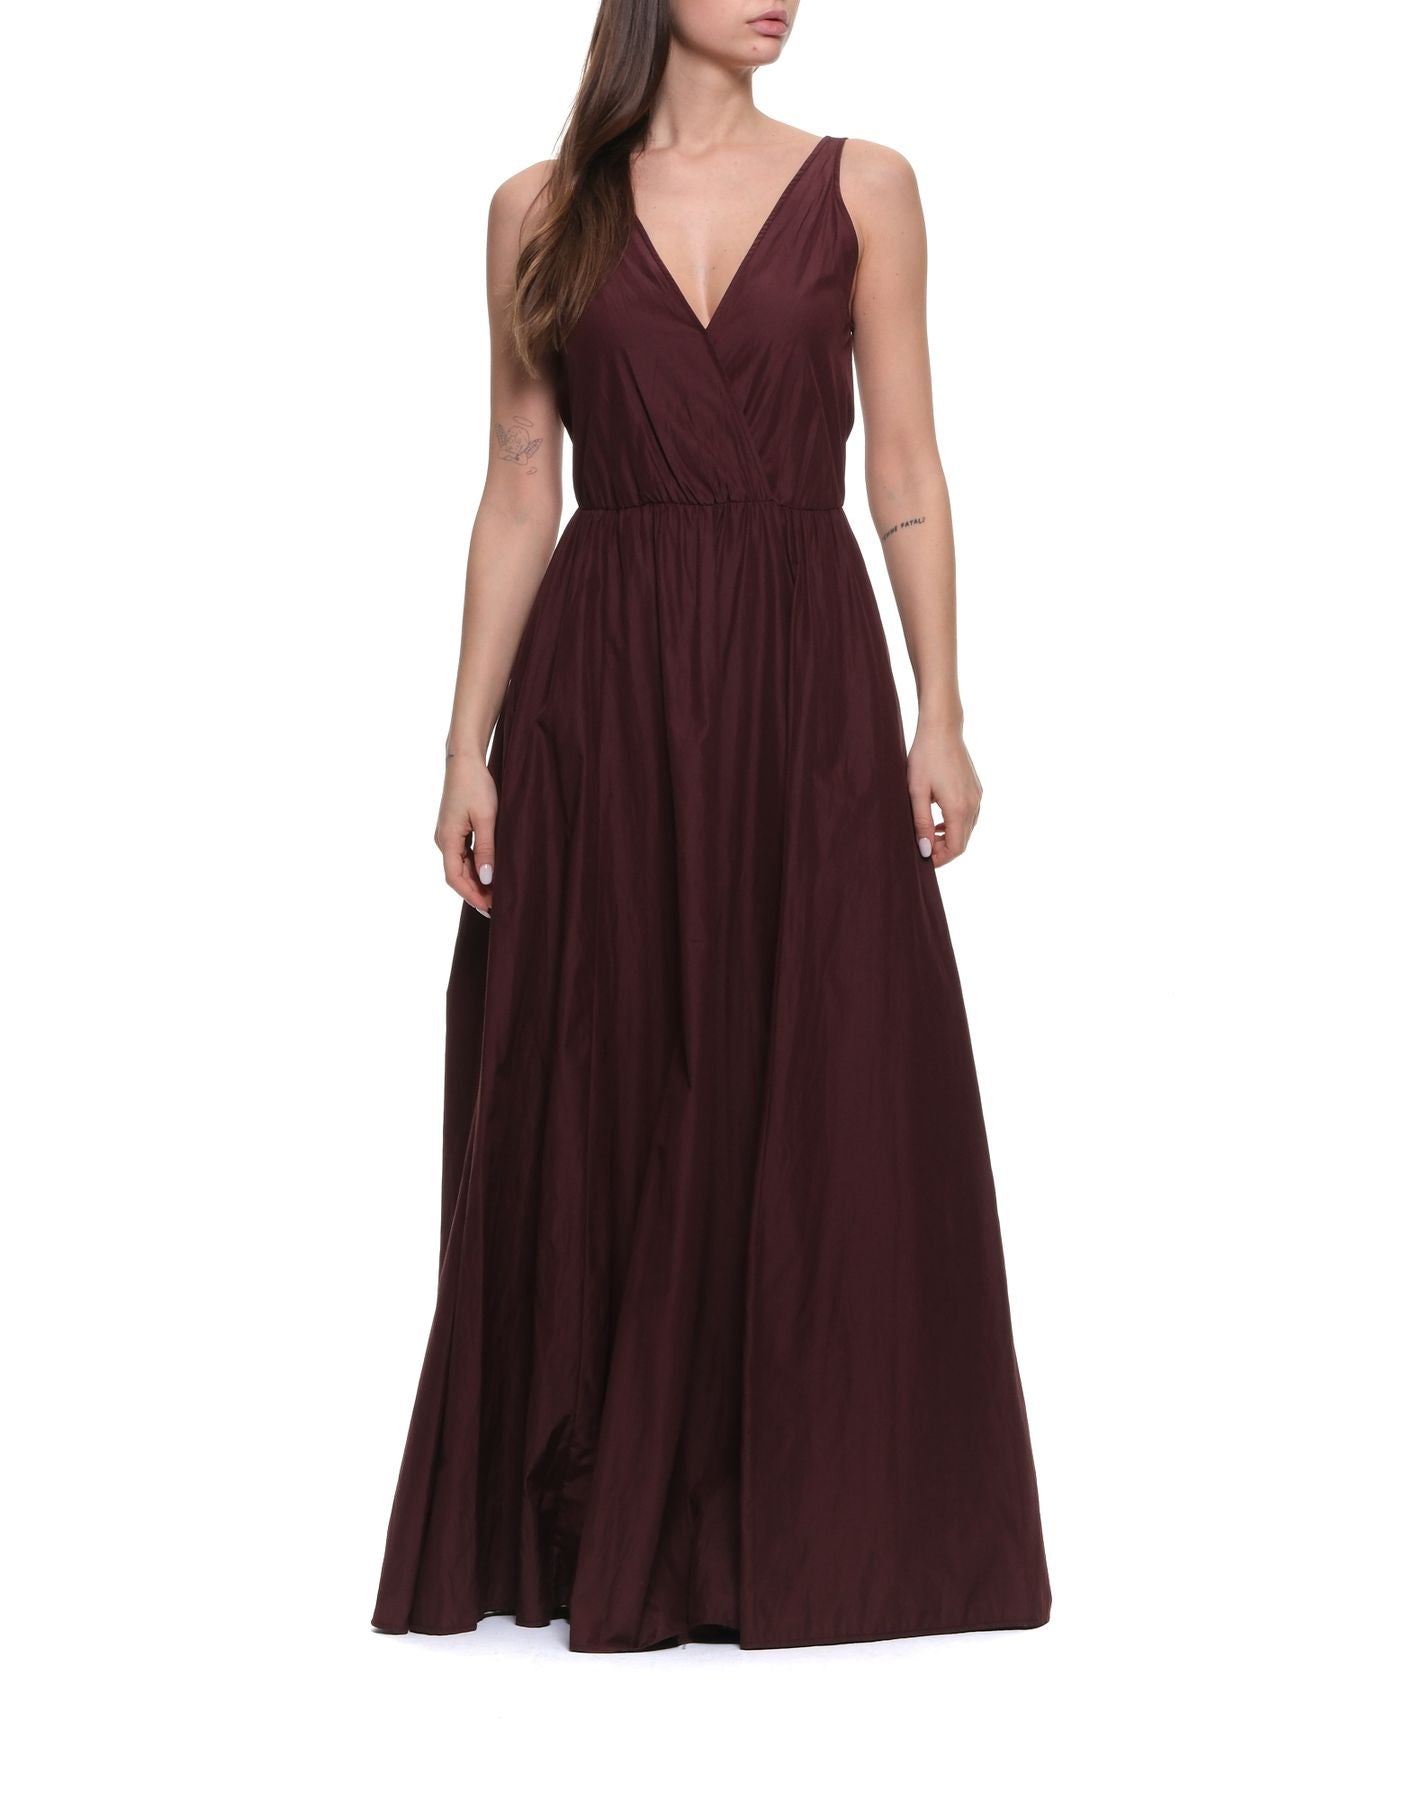 Robe pour femme 12035 MY DRESS CACAO FORTE_FORTE